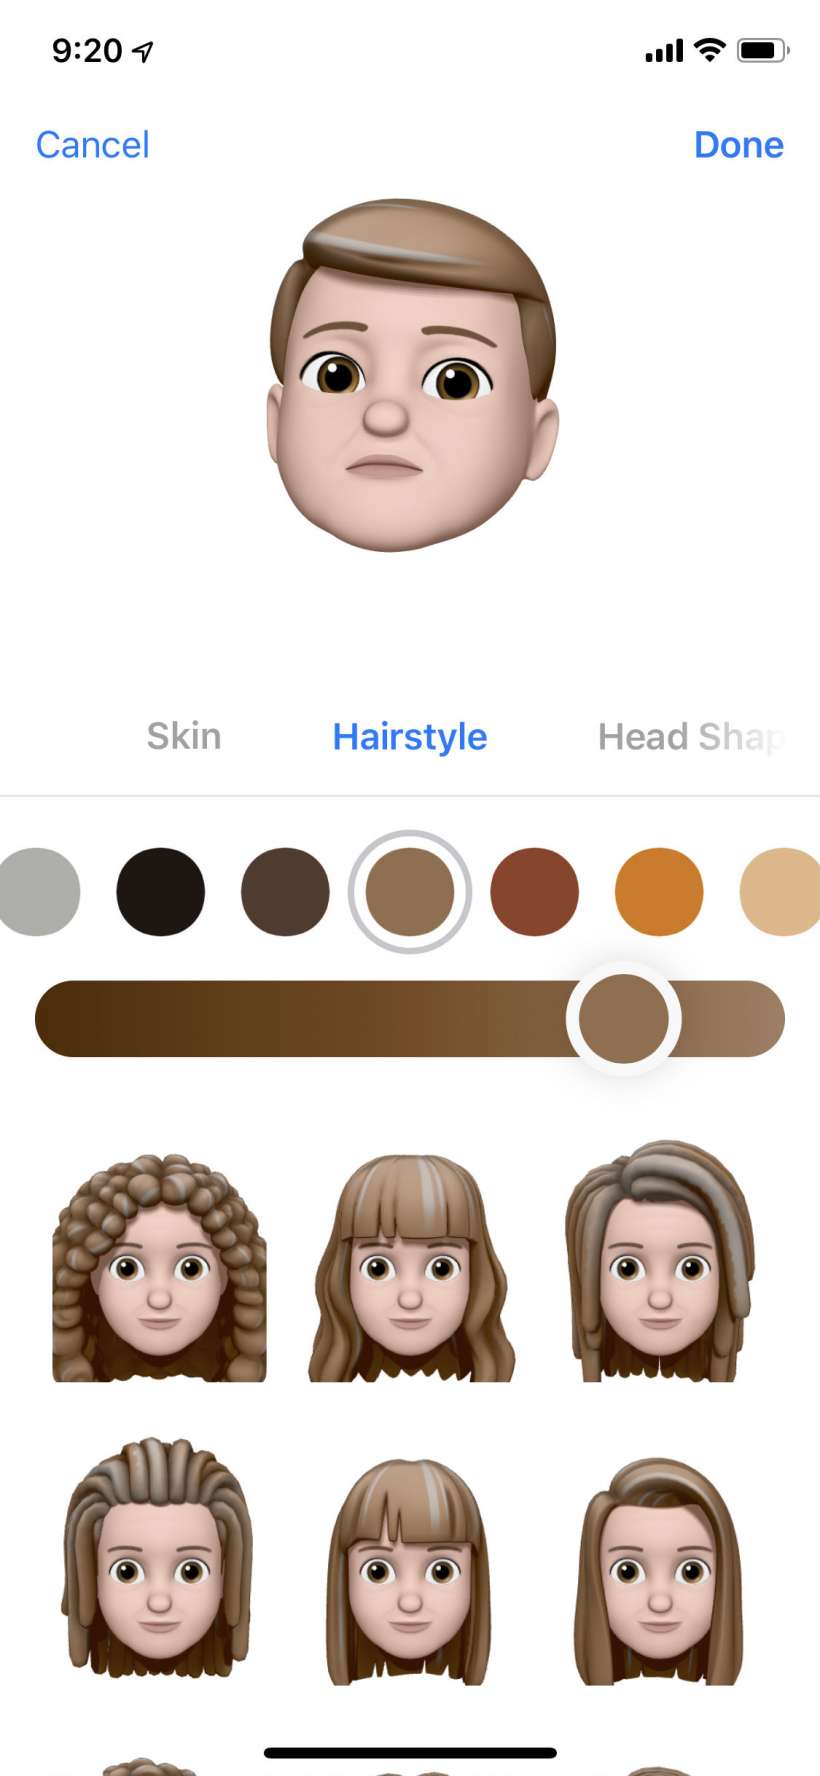 How to create and use Memoji in Messages on iPhone.